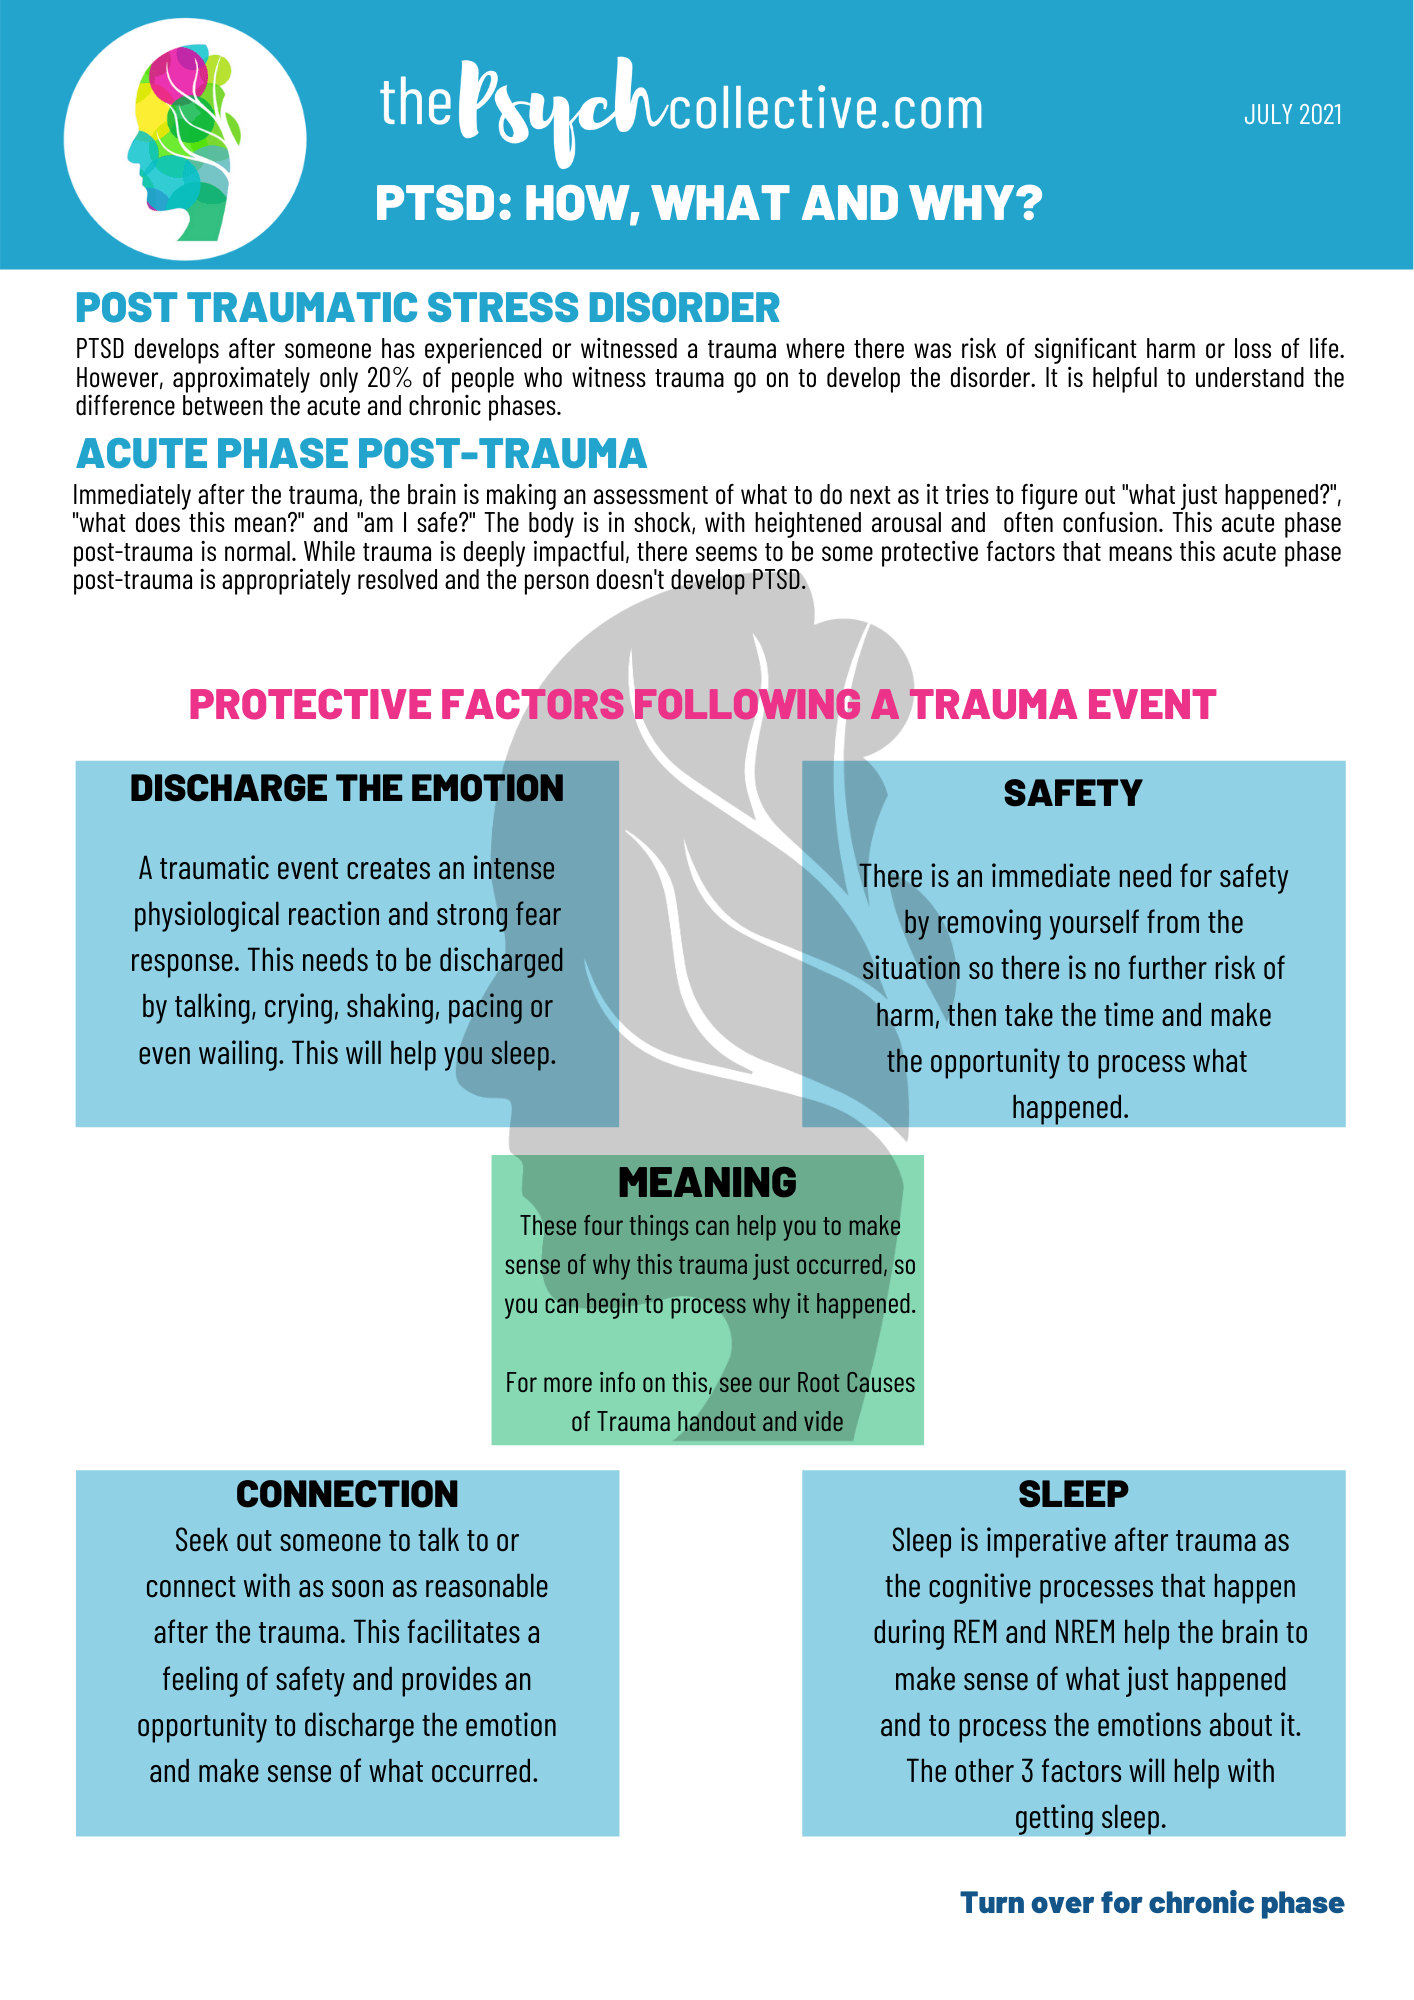 PTSD: How, What and Why? handout